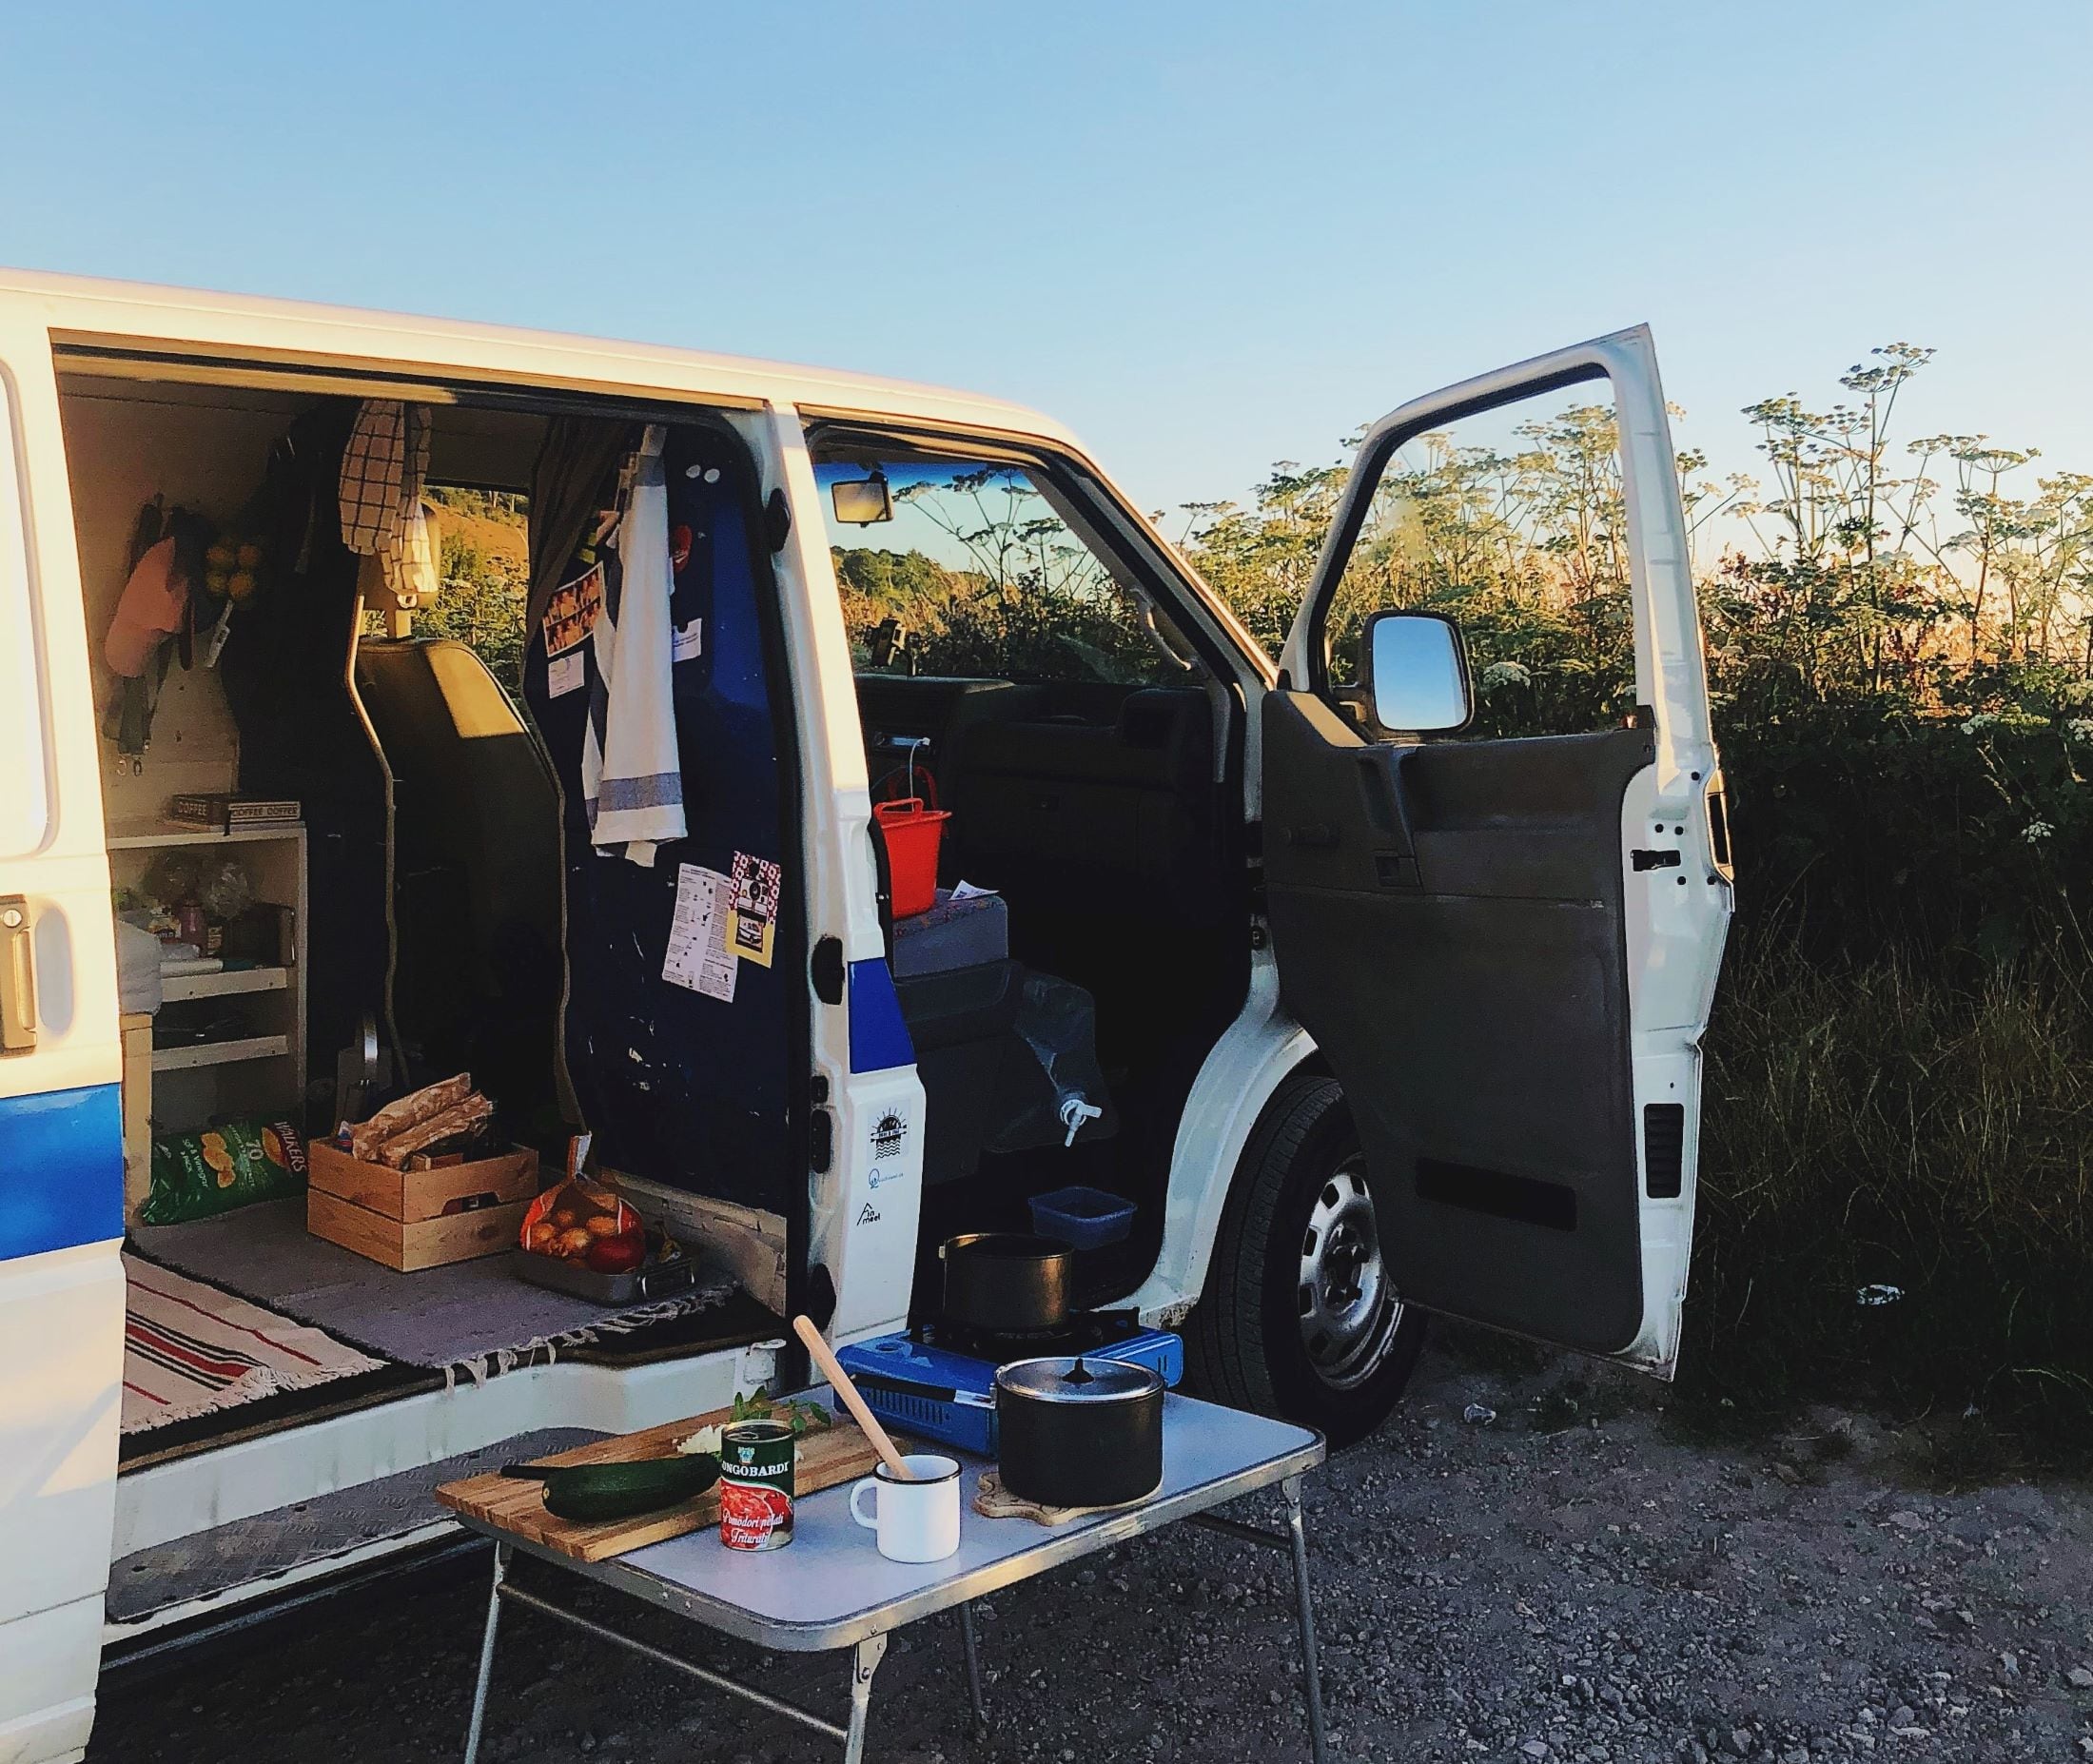 Comment:  Why some workers are opting to live in their vans